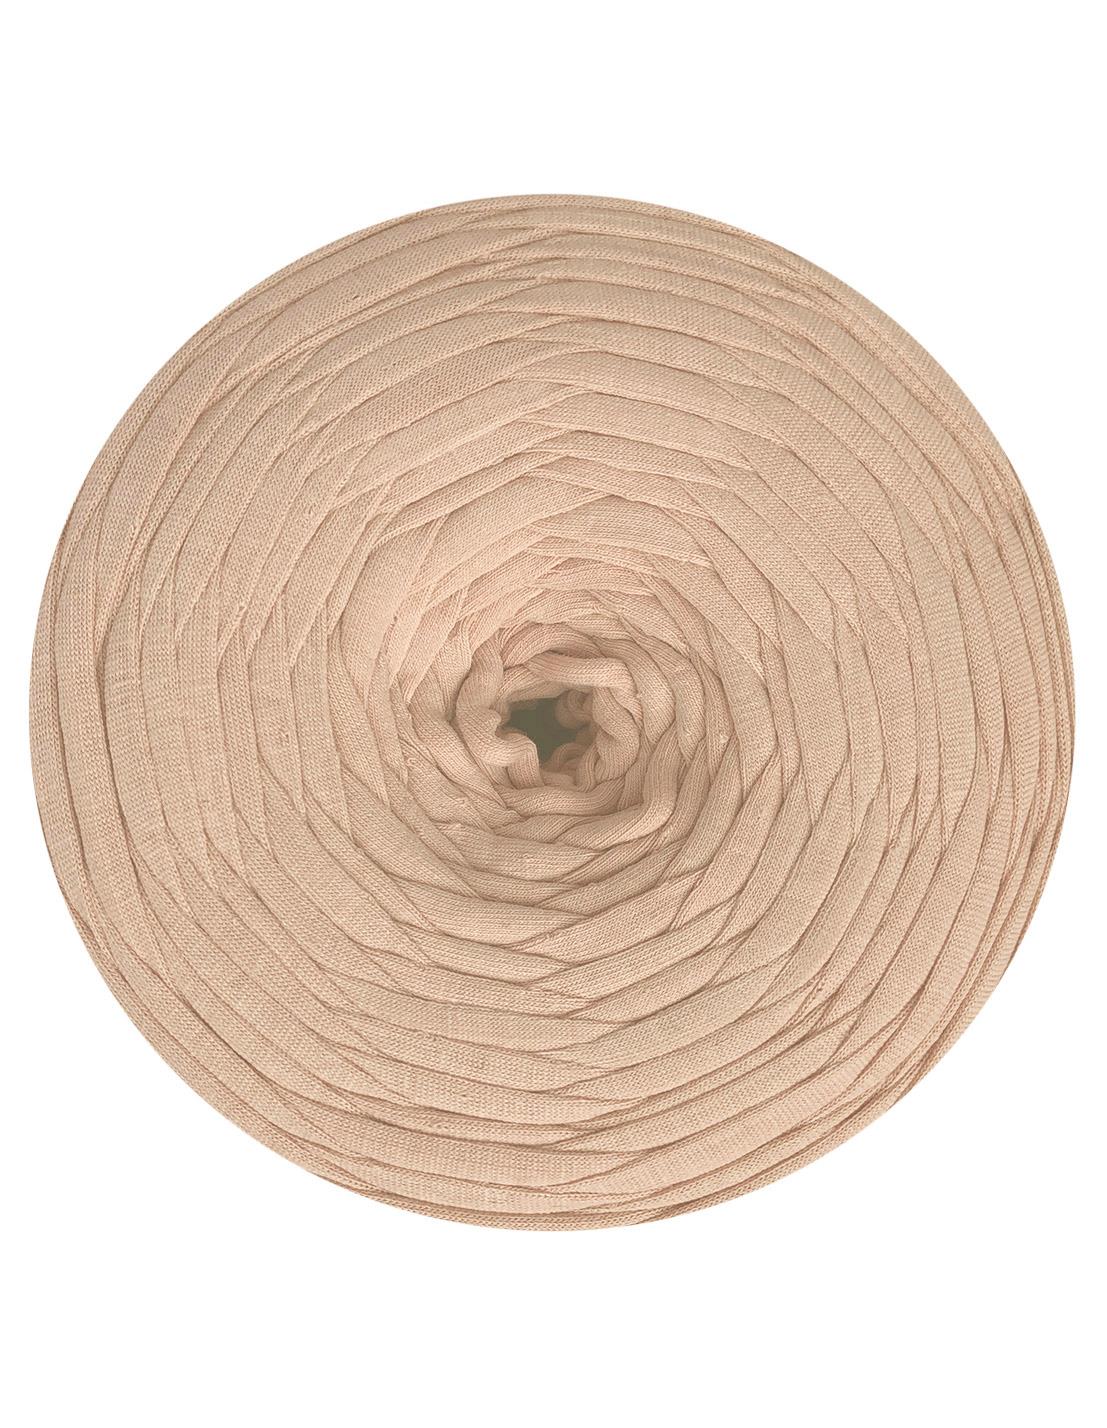 Light taupe t-shirt yarn by Hoooked Zpagetti (100-120m)